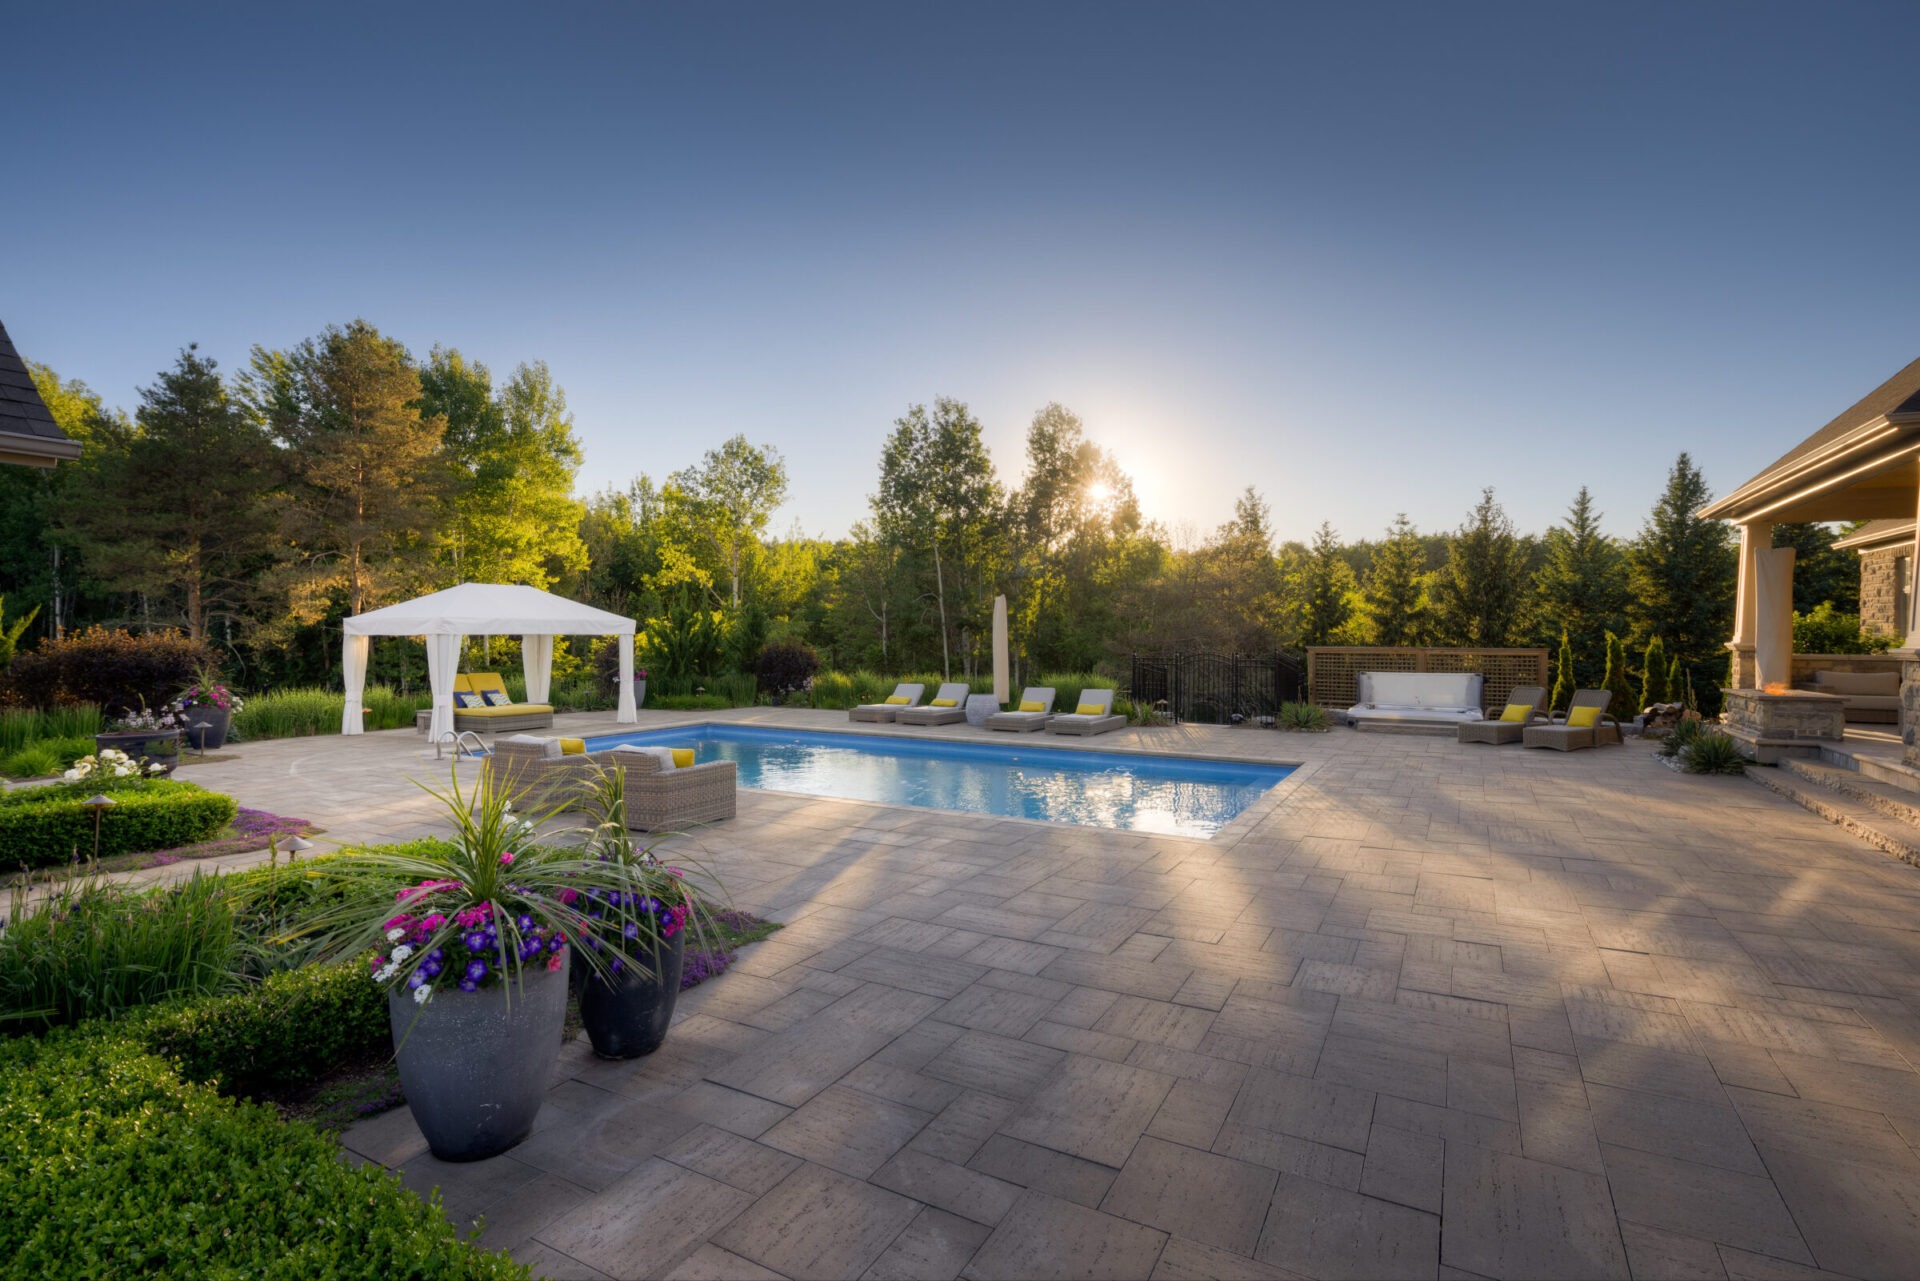 A luxurious backyard with a pool, sun loungers, a gazebo, tiled patio, and landscaped garden at sunset, surrounded by lush greenery and clear skies.